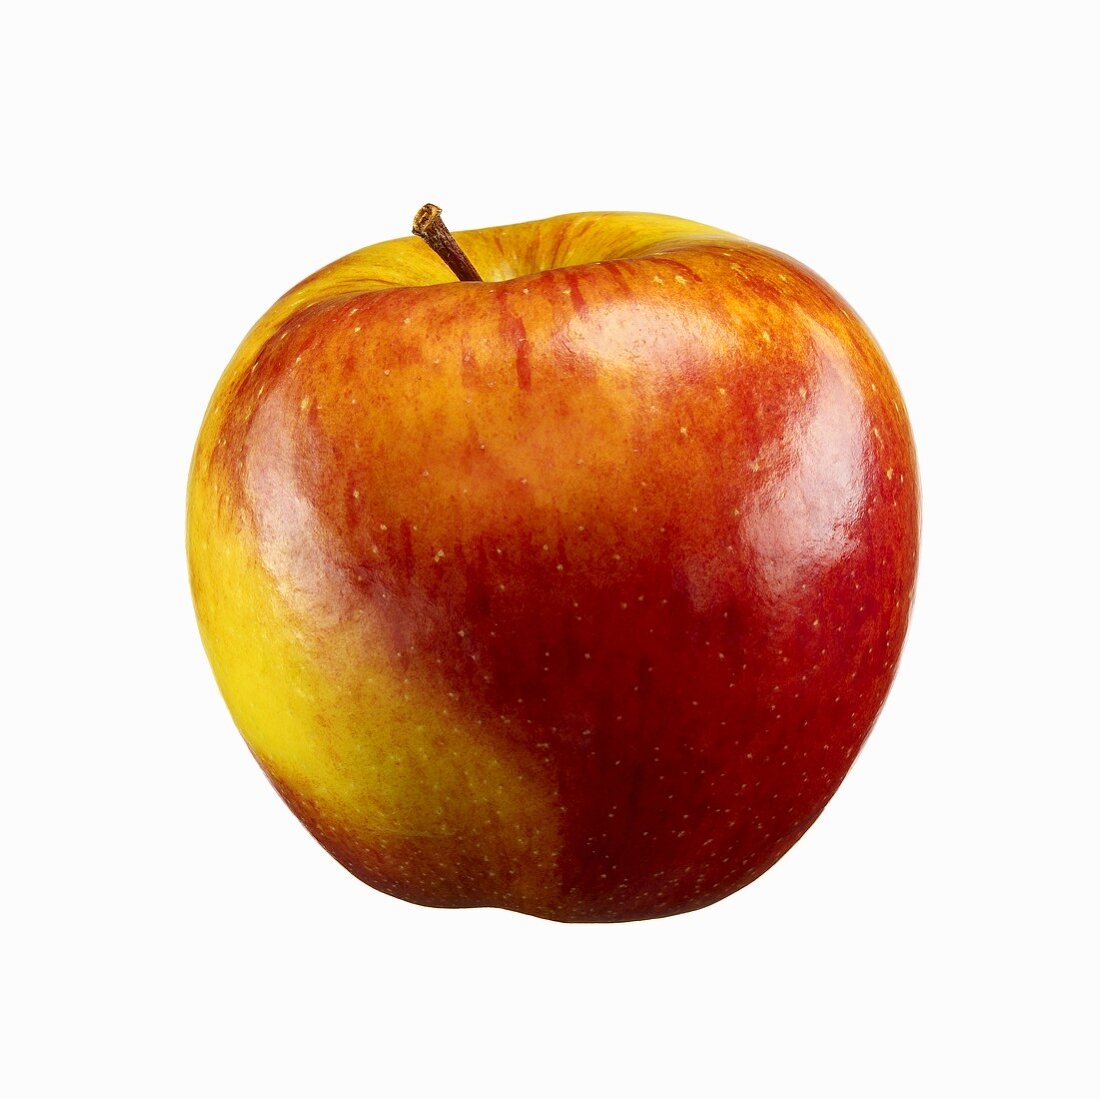 A red and yellow apple